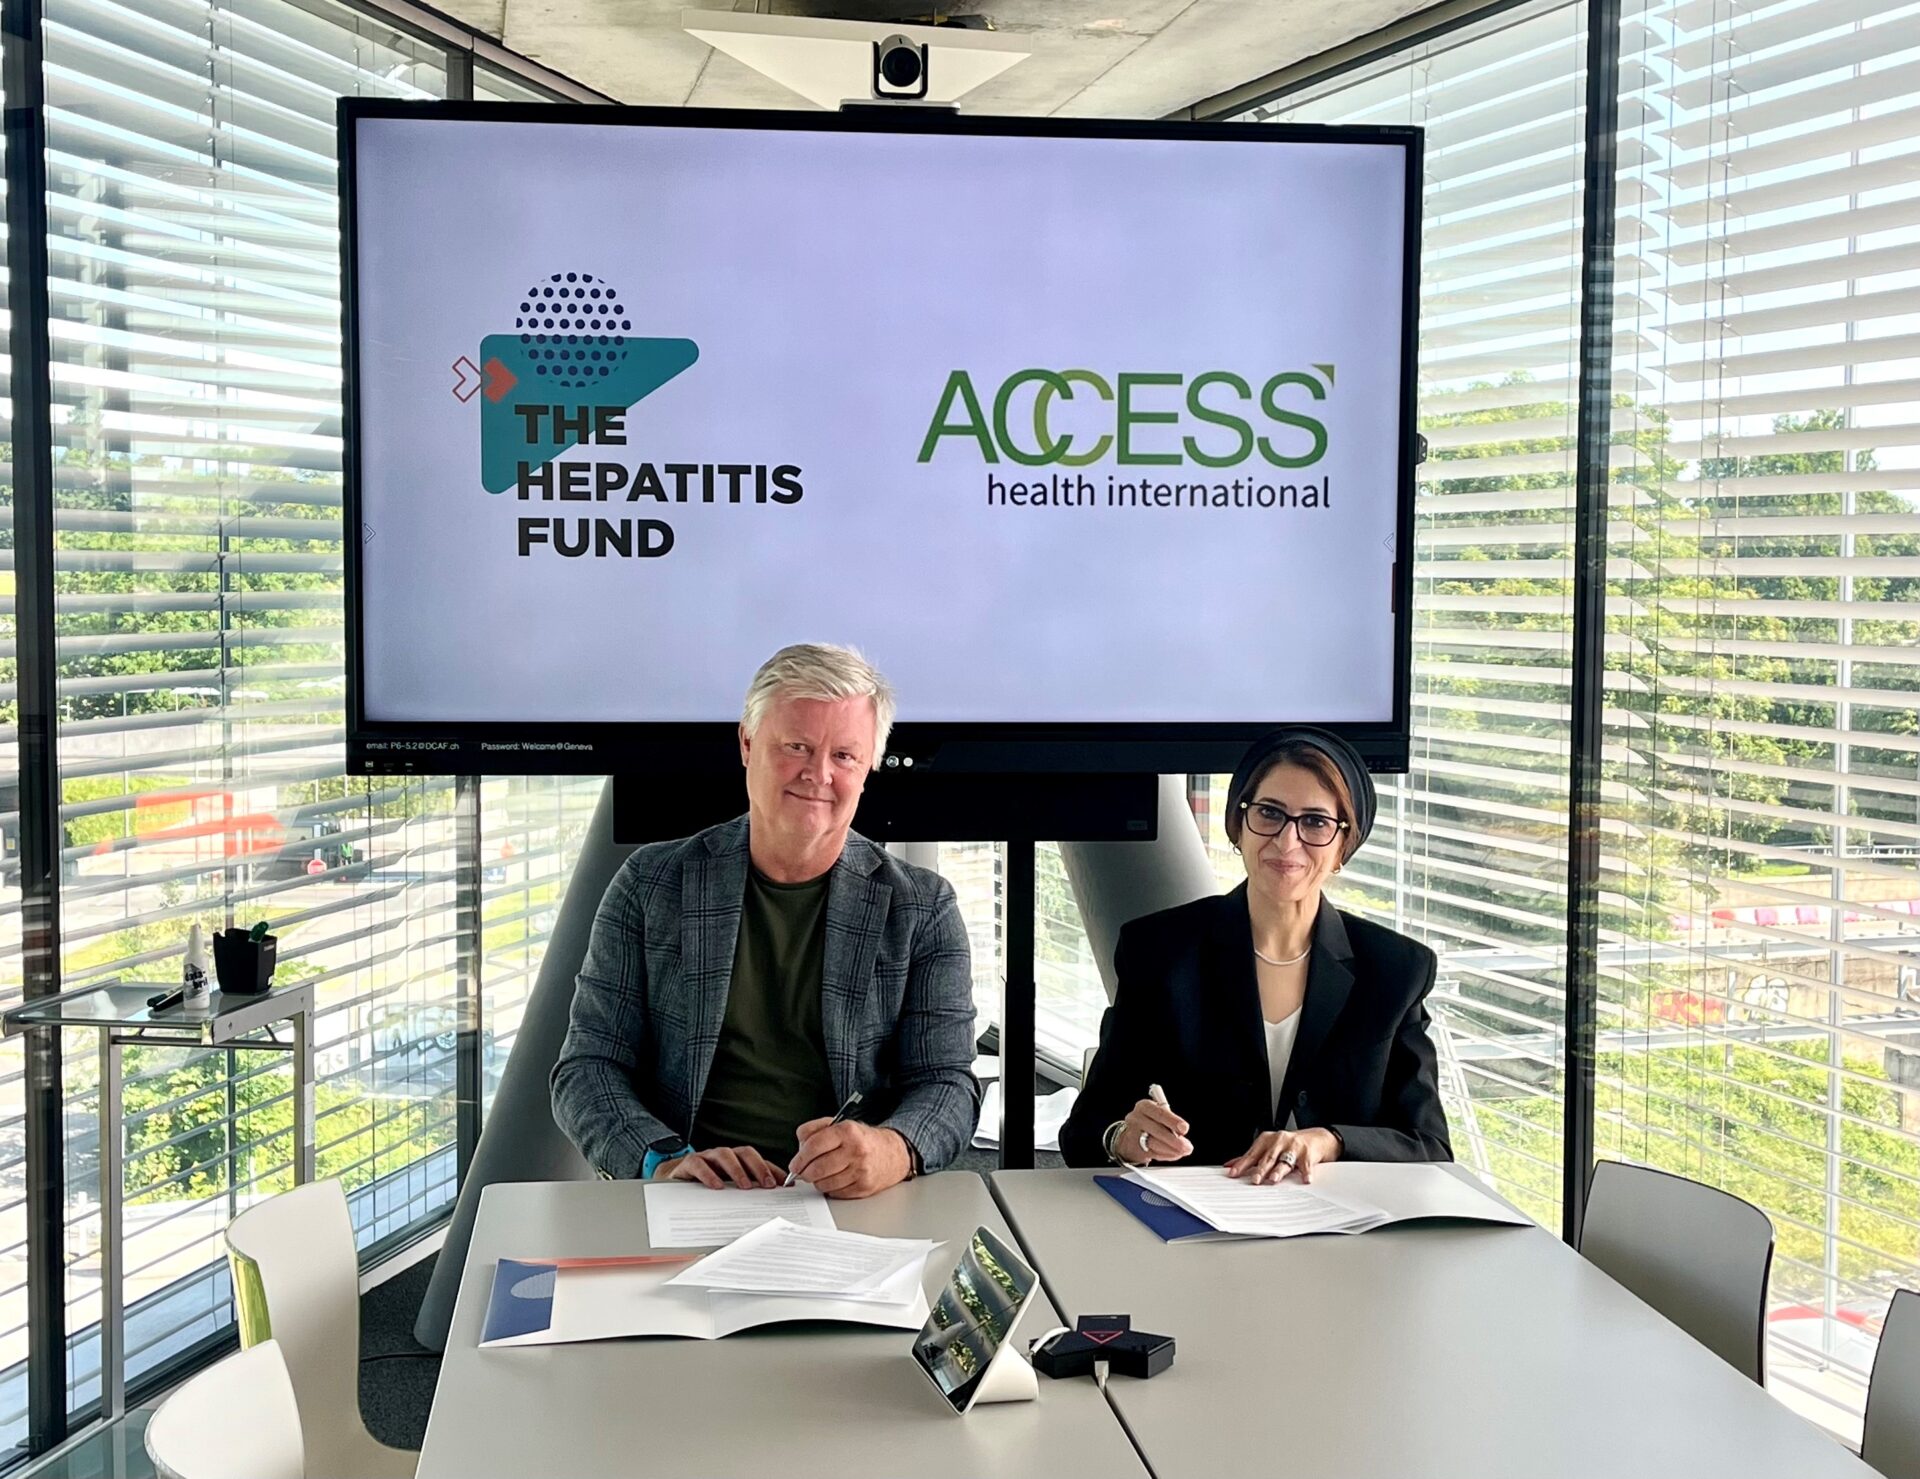 Dr Hala Zaid, Regional Director of Access Health International, and Finn Jarle Rode, ED of The Hepatitis Fund, signing the MoU